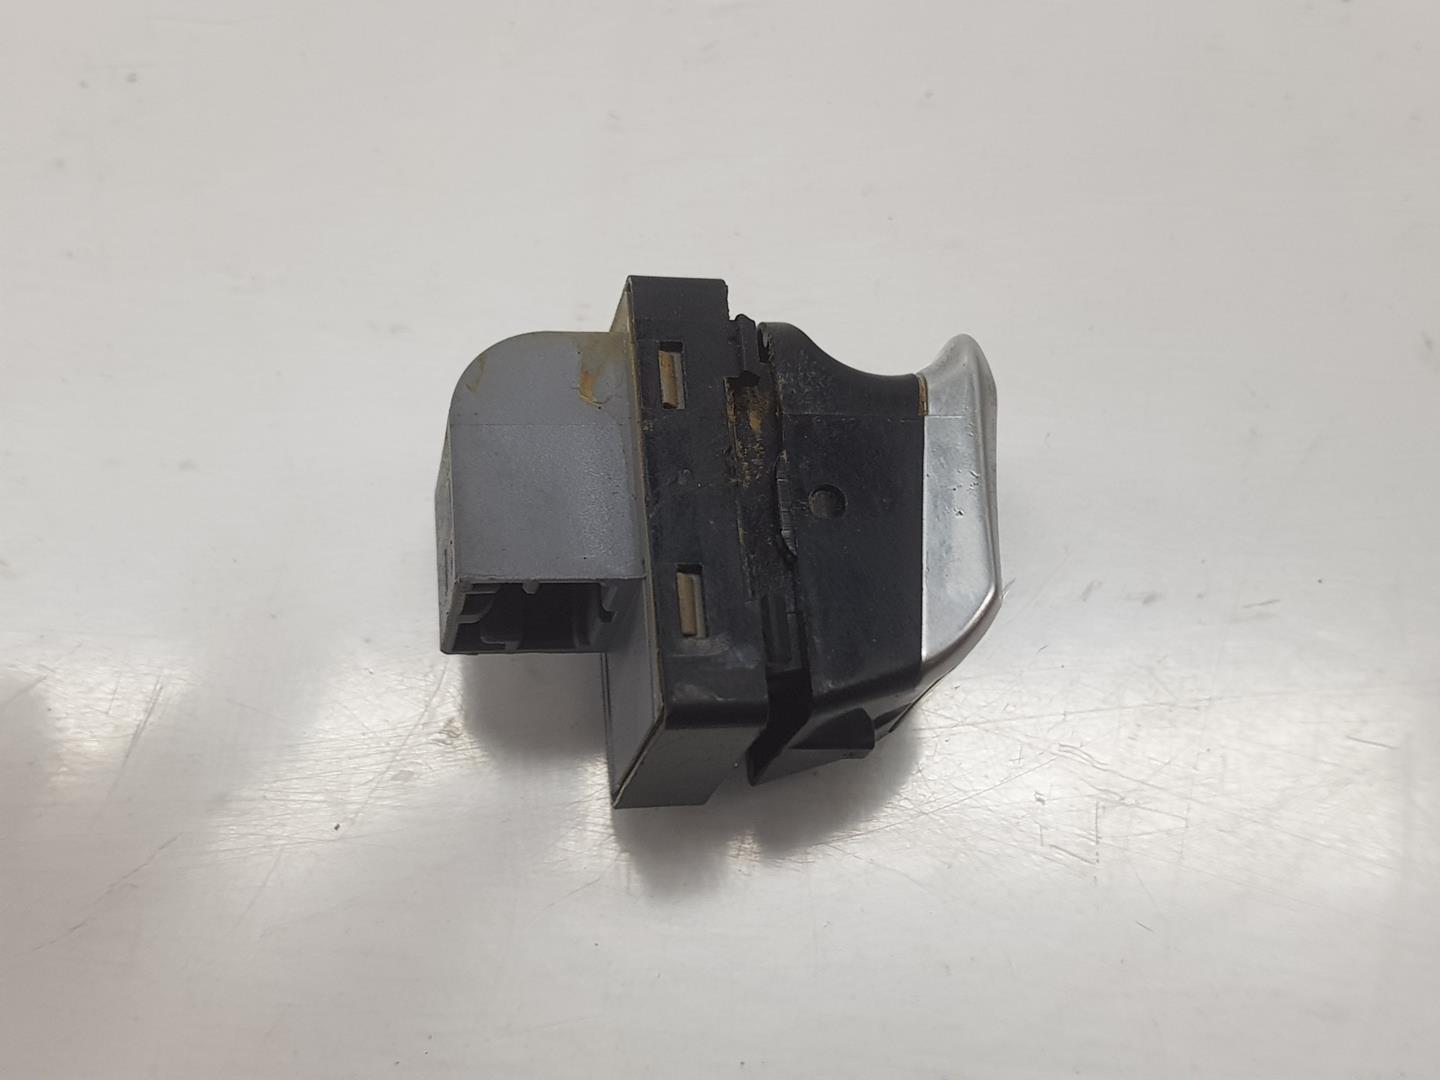 AUDI A7 C7/4G (2010-2020) Rear Right Door Window Control Switch 4H0959855A, 4H0959855A 19717025